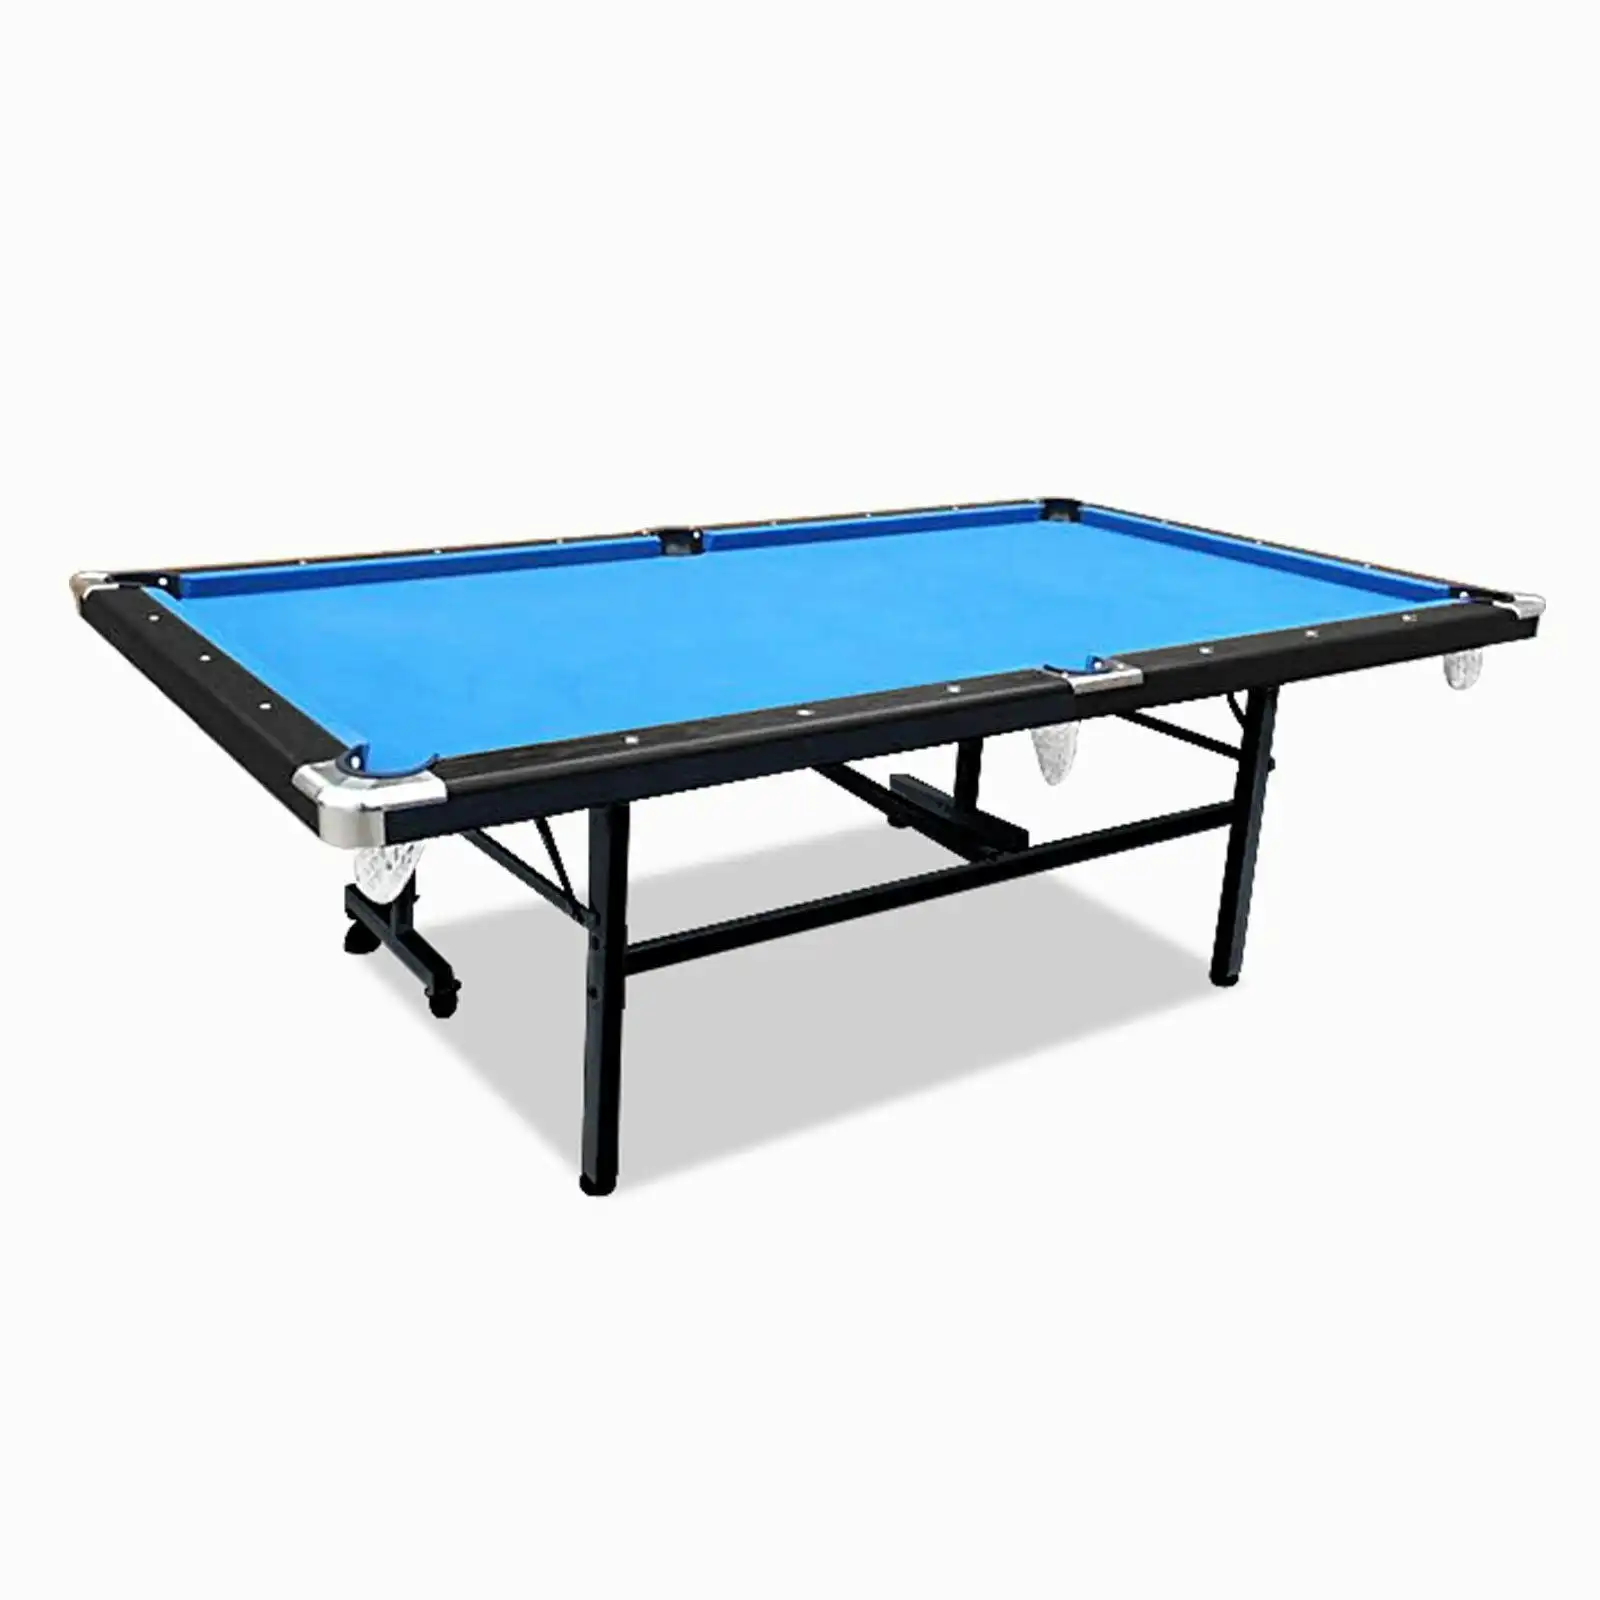 MACE 8FT Foldable Pool Table Blue/Red/Green Felt Billiard Table Free Accessory for Small Room